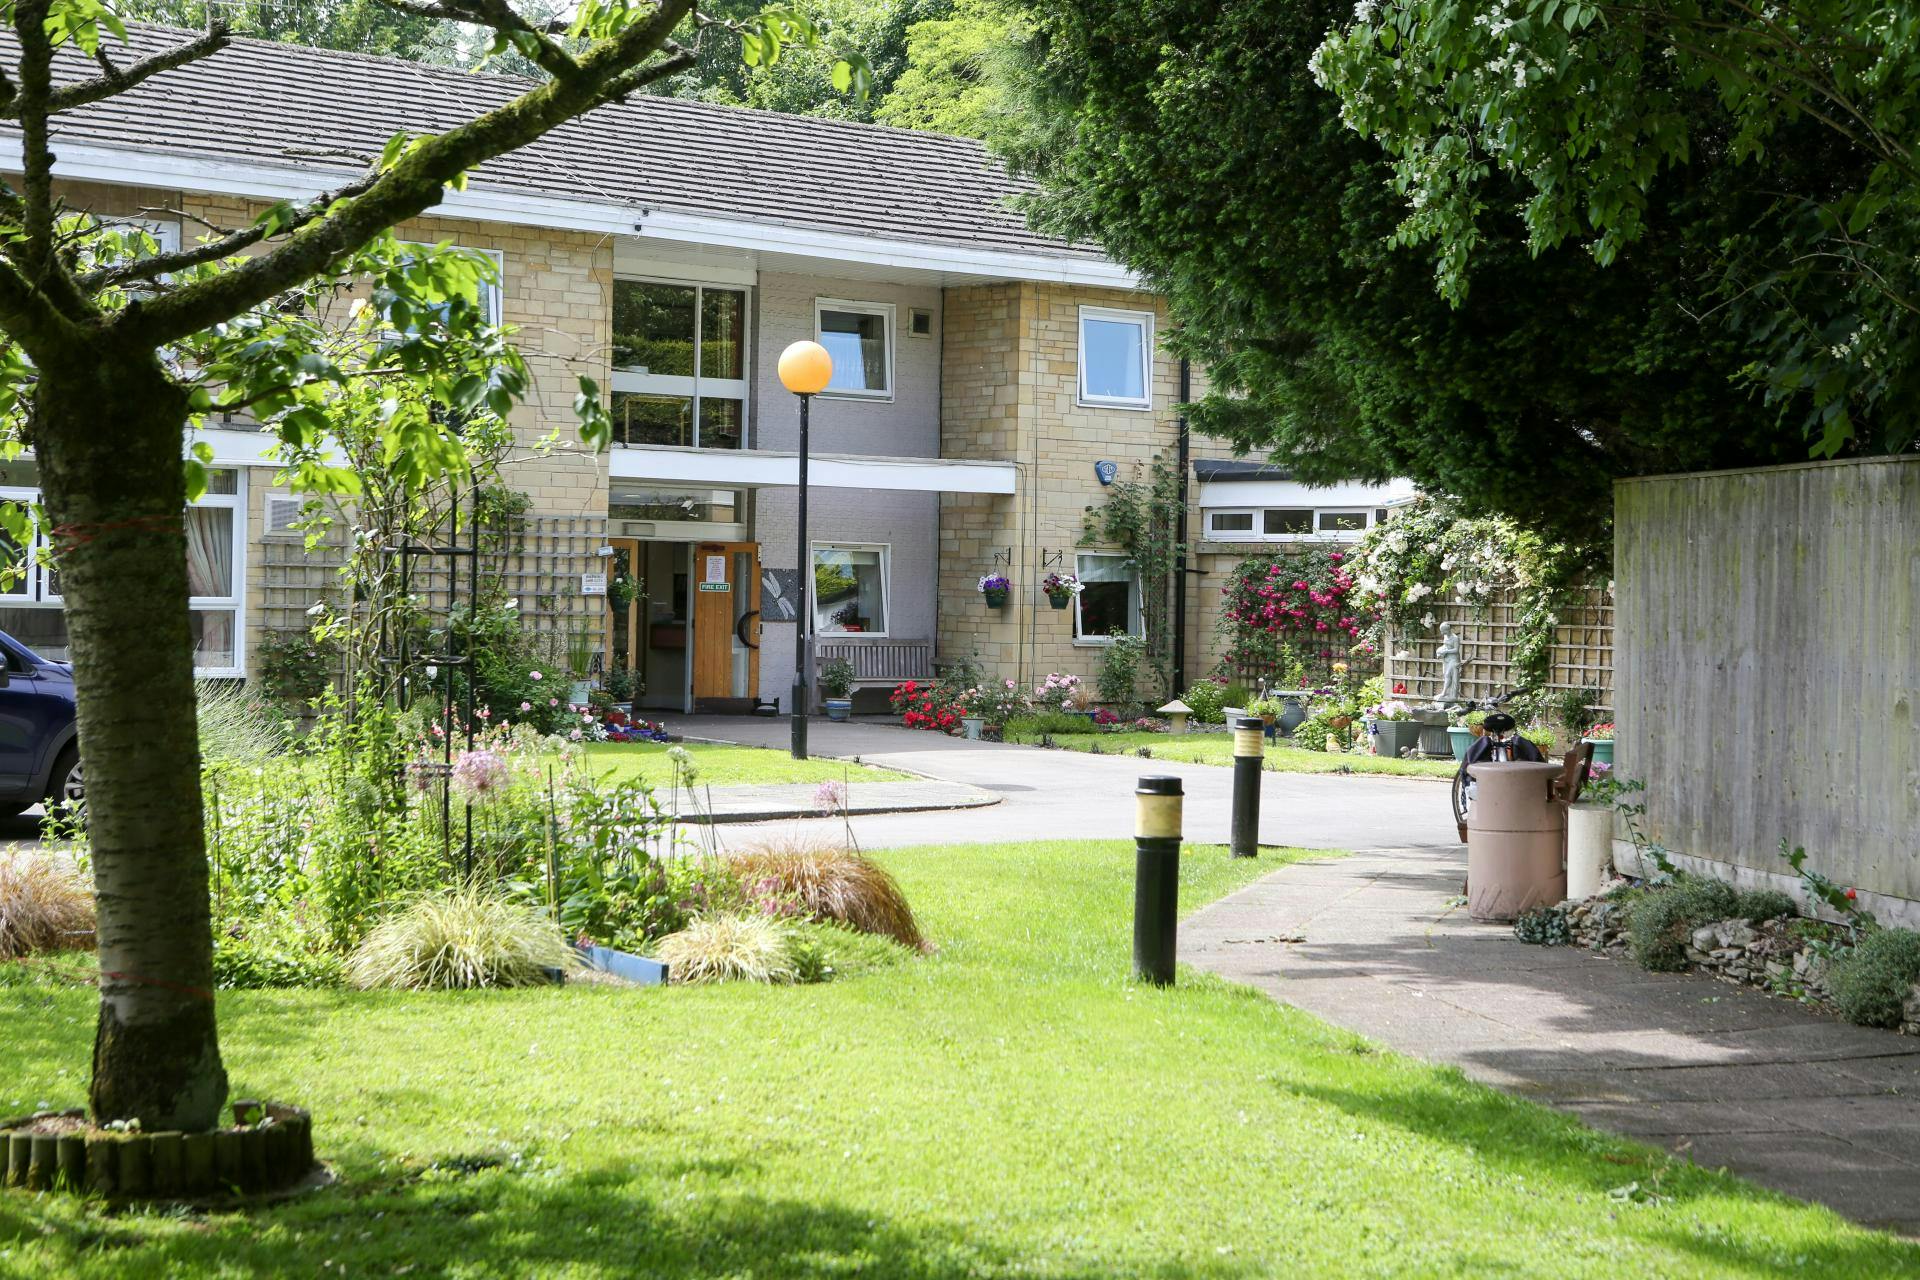 Garden at Paternoster House Care Home in Cirencester, Cotsworld